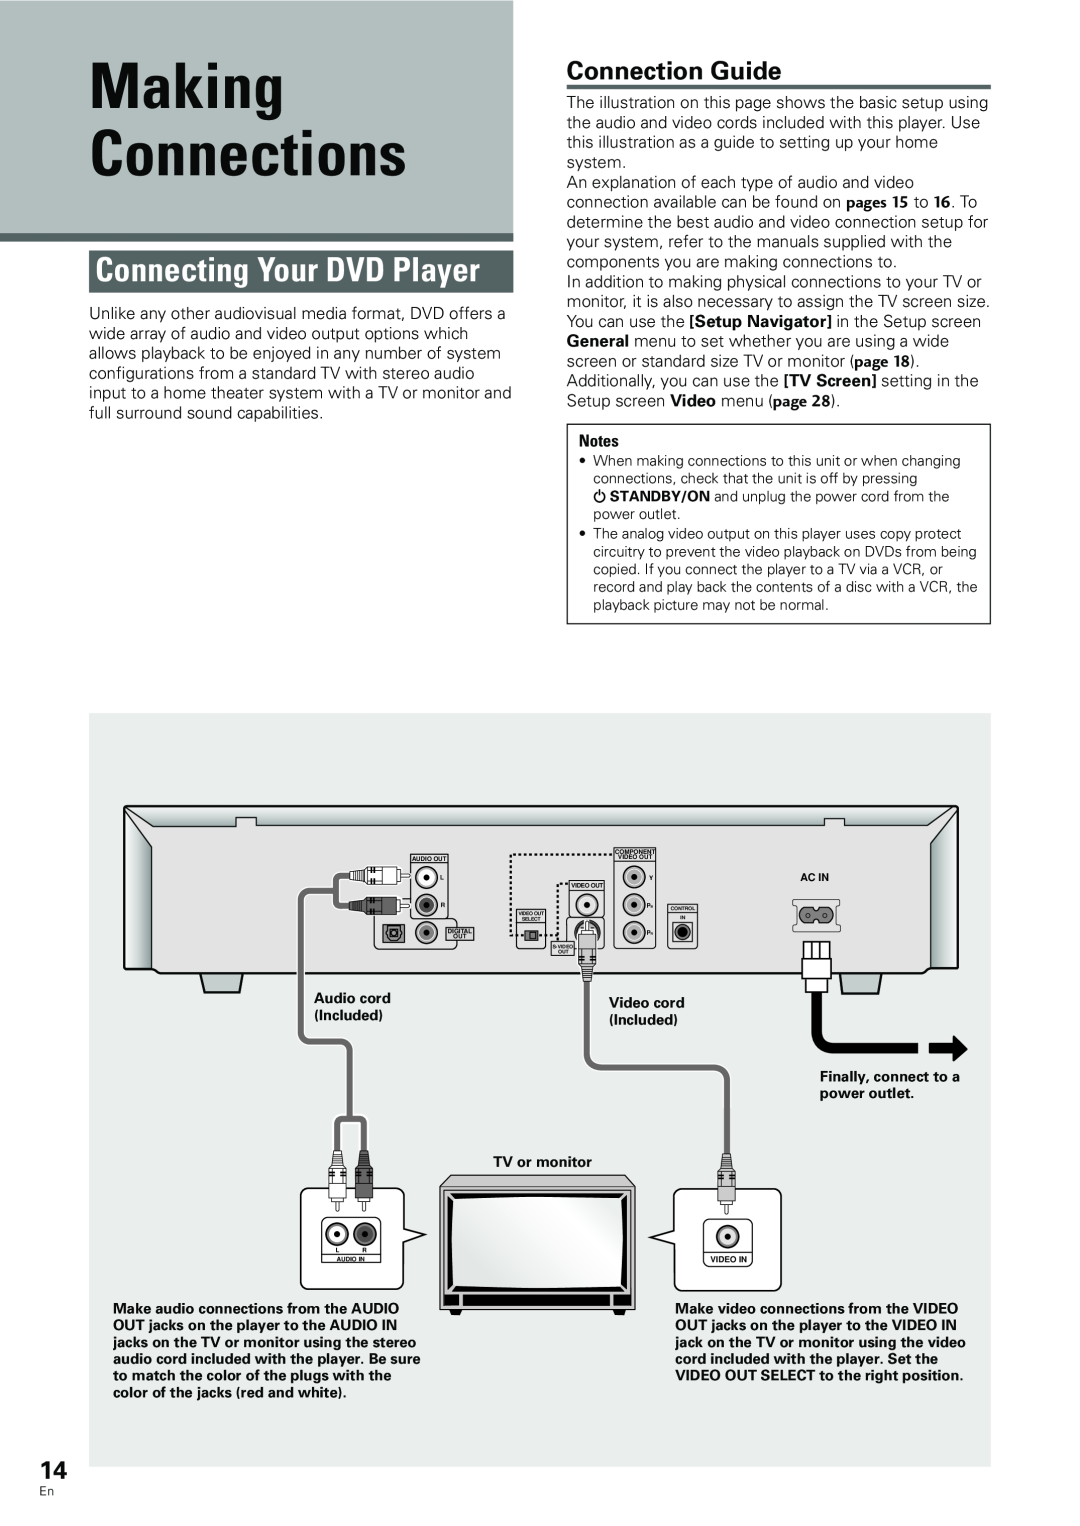 Pioneer DV-233, DV-344 operating instructions Connecting Your DVD Player, Connection Guide, Making Connections 